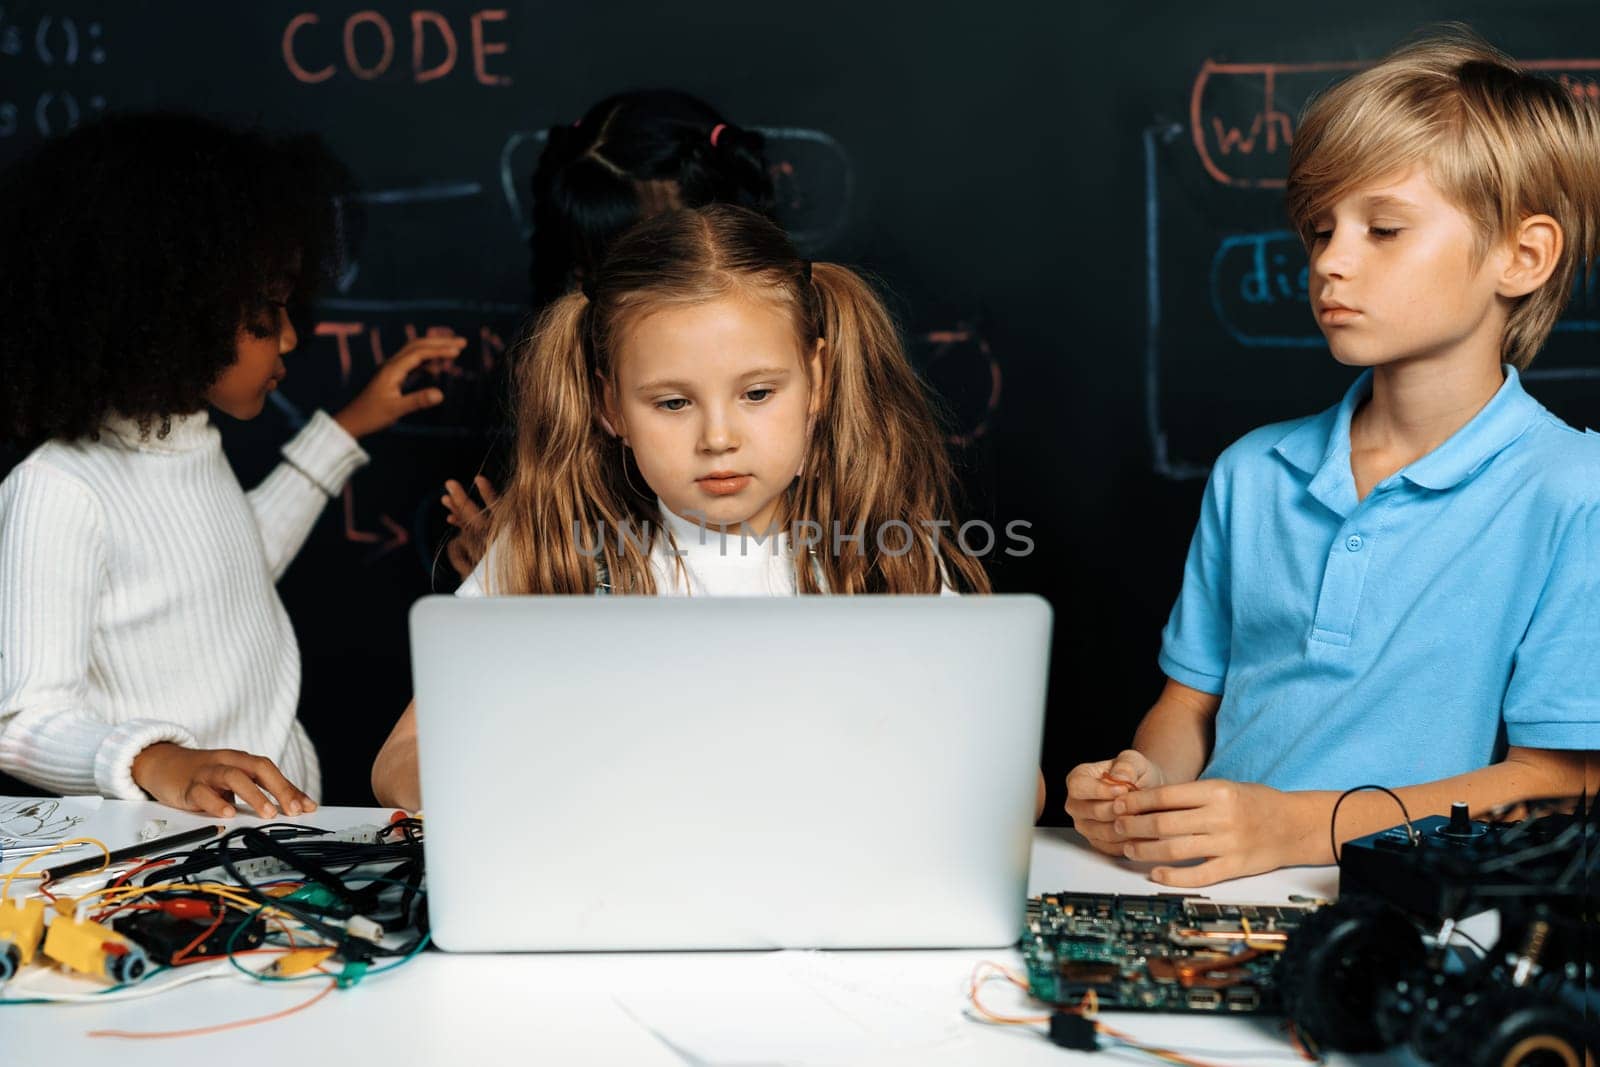 Smart girl in white bib learning about coding robotics technology using laptop in the STEM class. Schoolboy in blue shirt try to educate motherboard while smart schoolgirls reading code. Erudition.